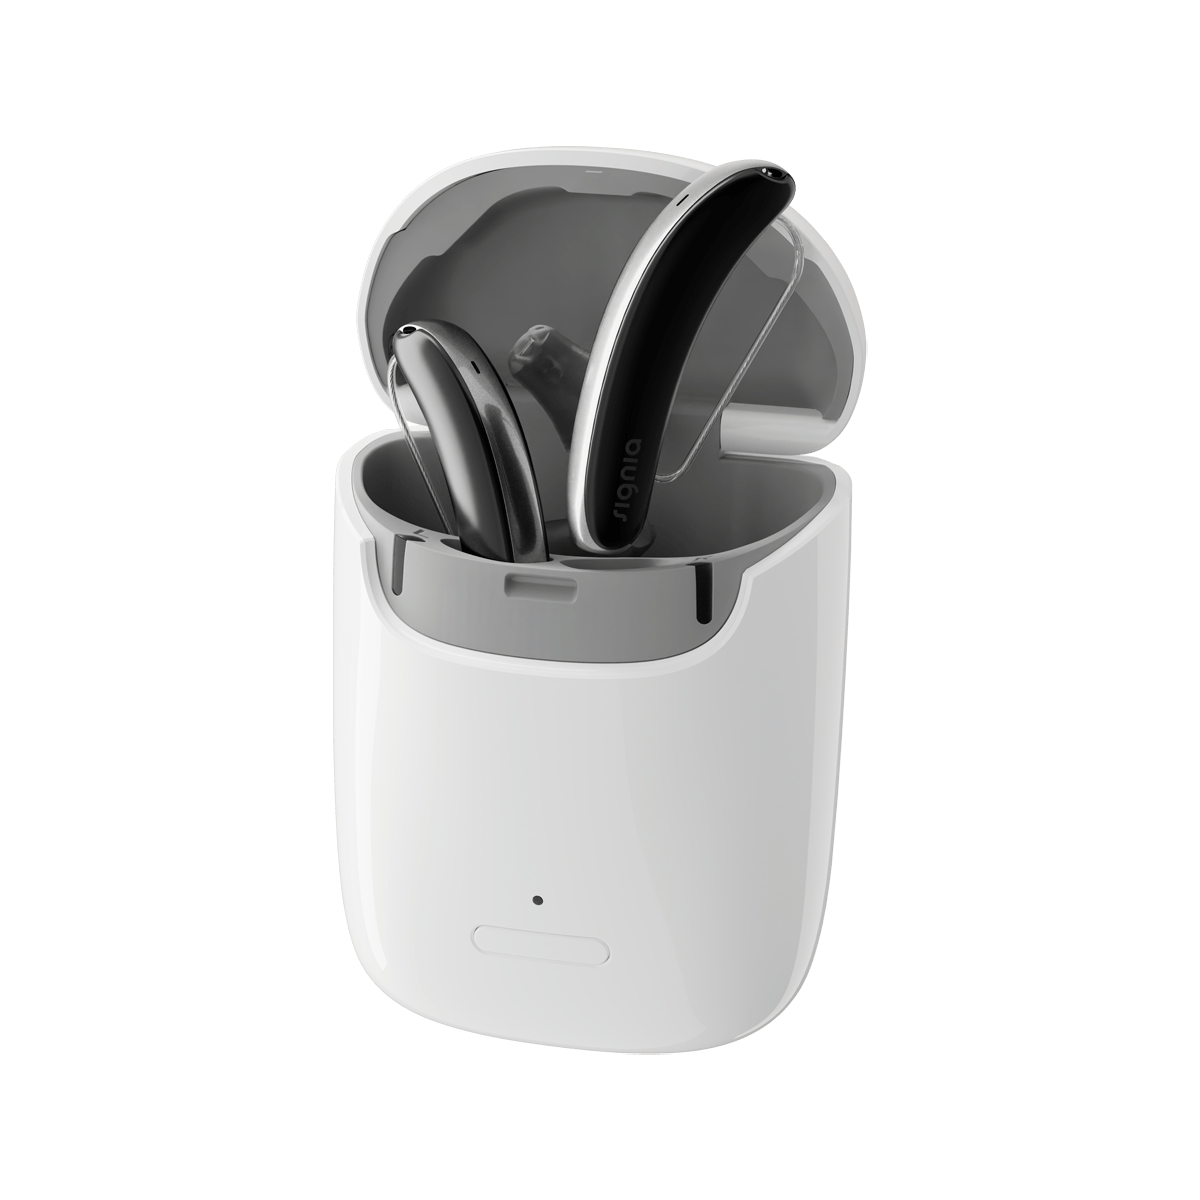 Rechargeable Hearing Aids